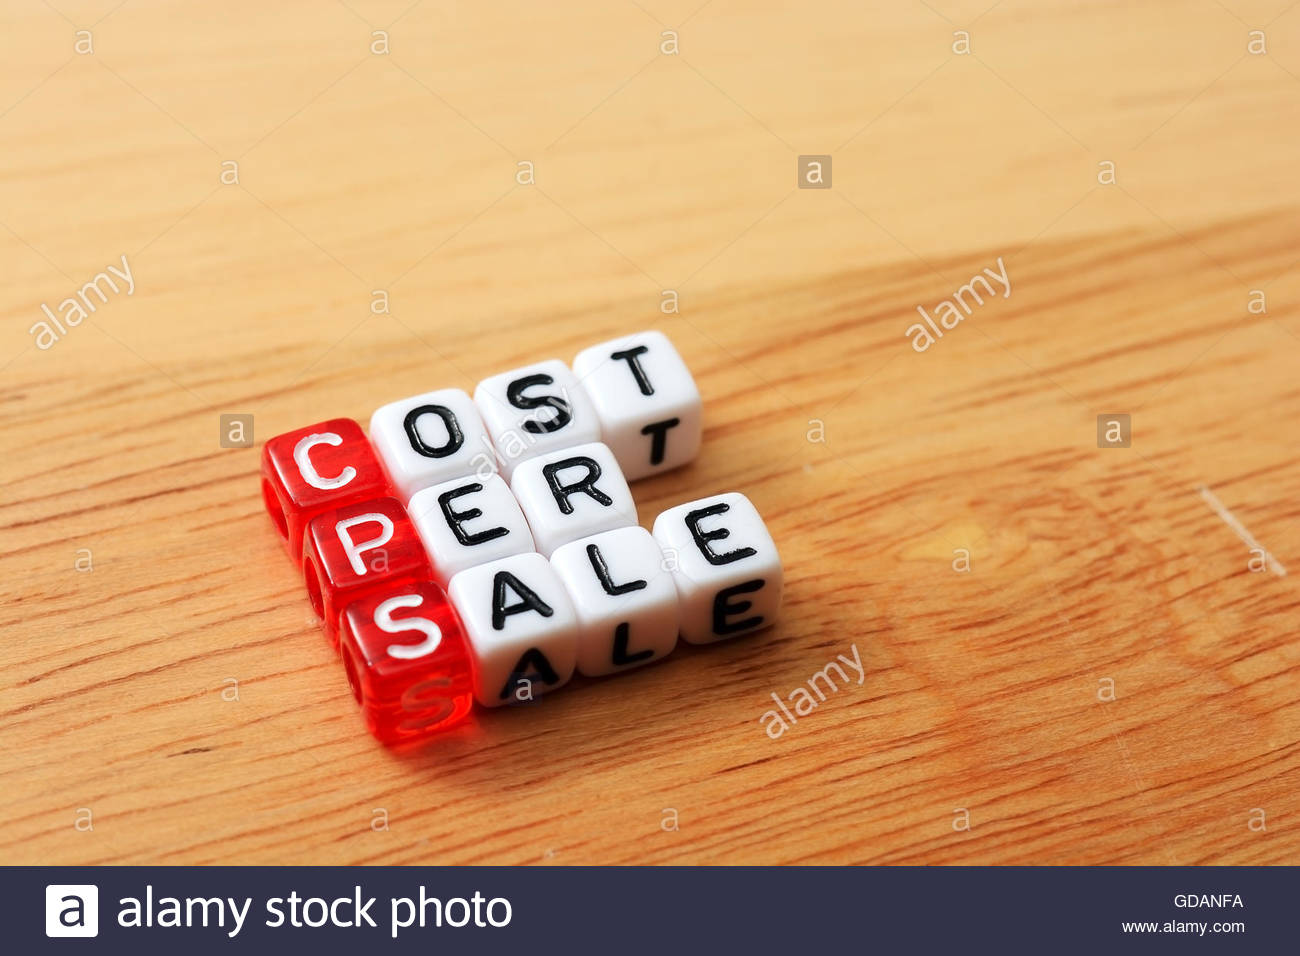 Dice With Word Cps Cost Per Sale On Wooden Background Stock Photo